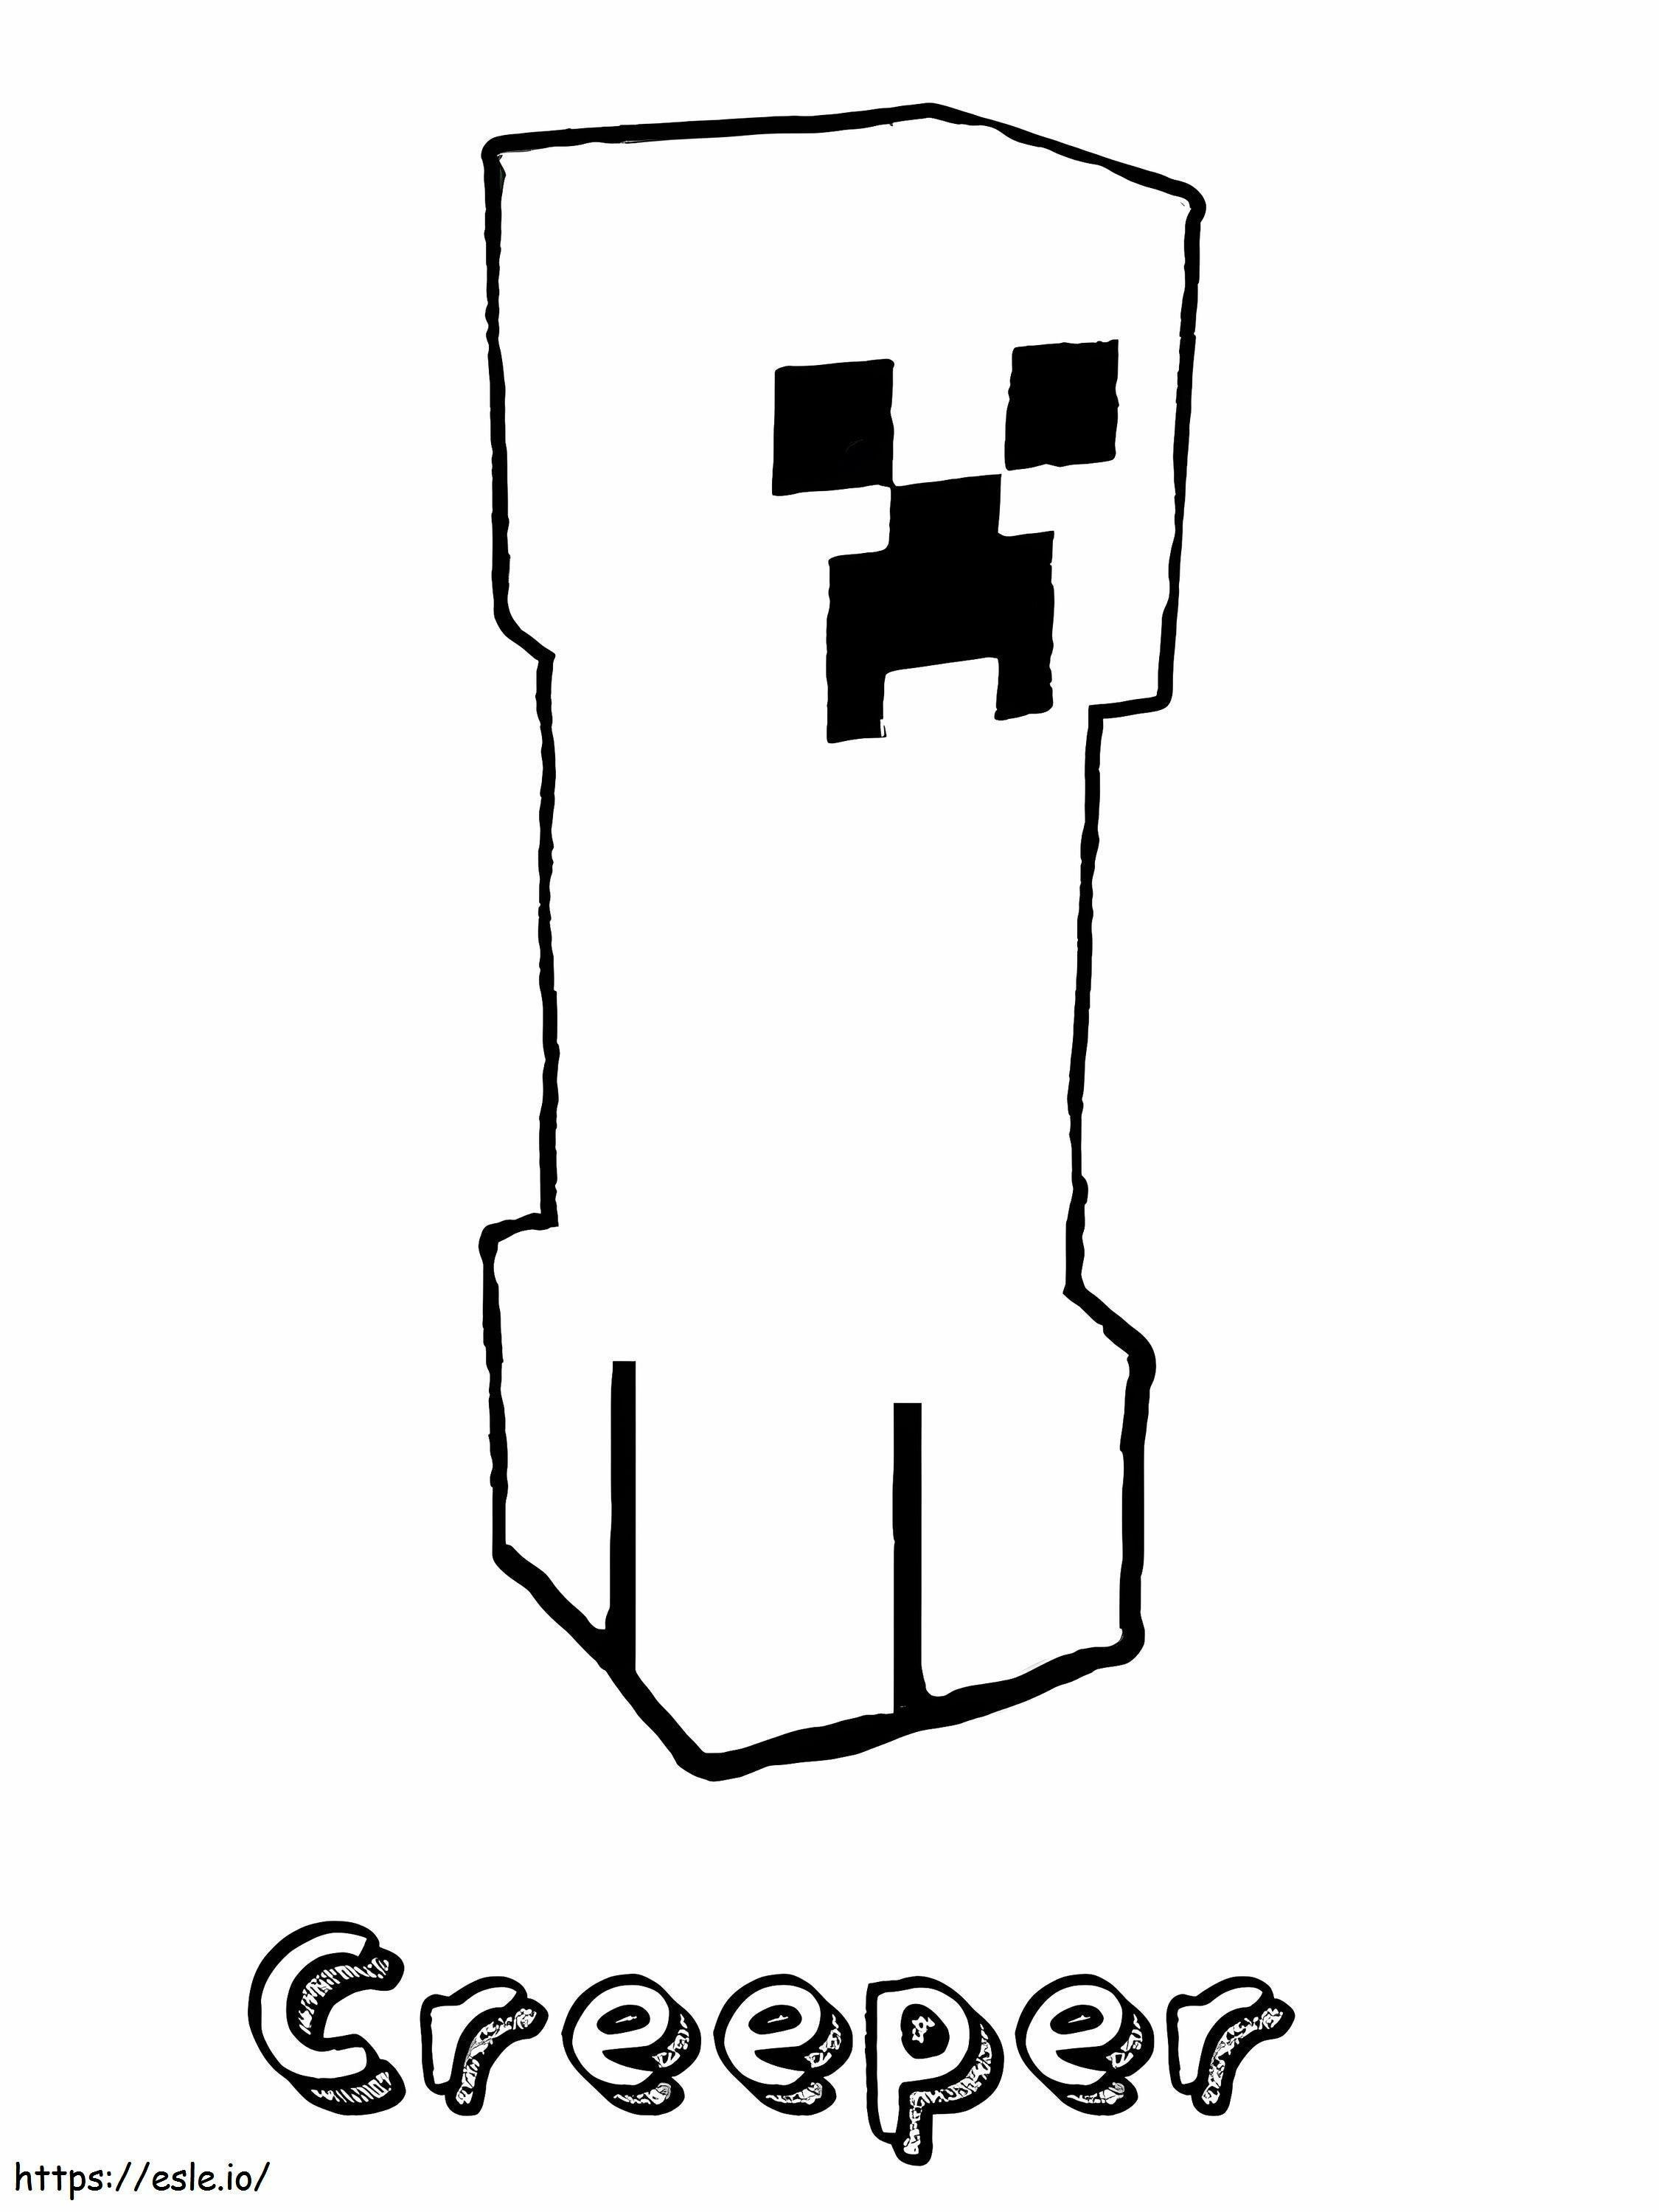 Easy Minecraft Creeper coloring page